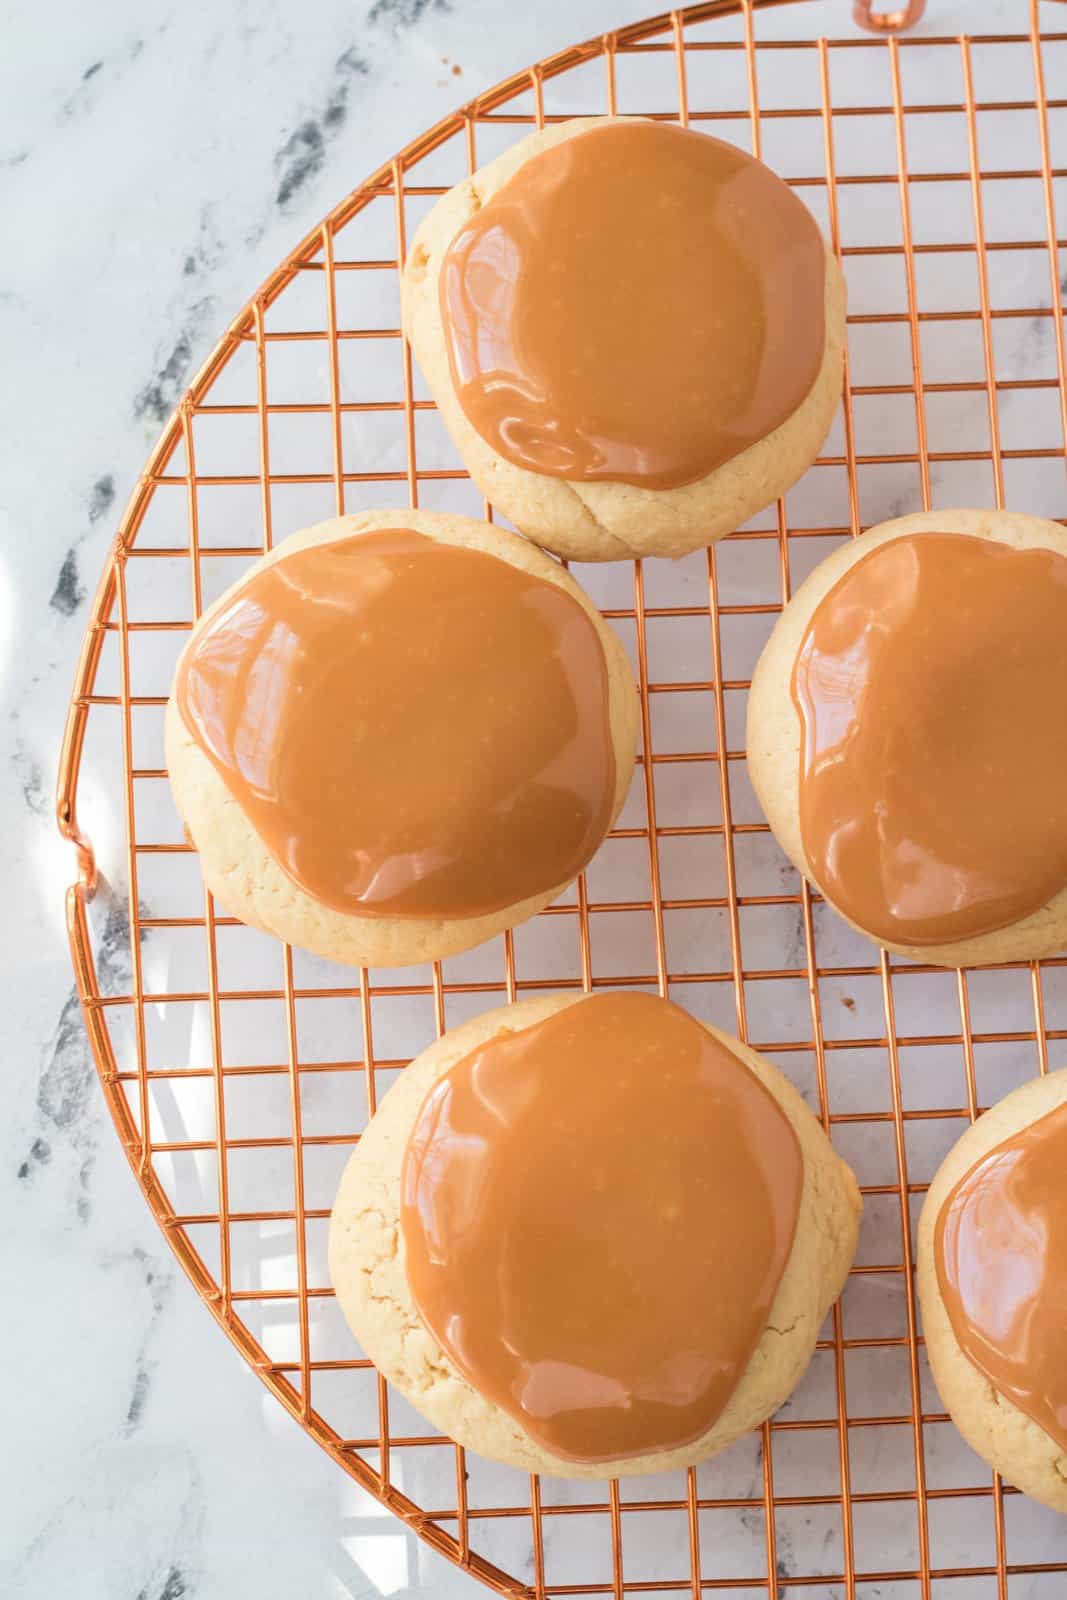 Caramel spread on top of cookies on wire rack.